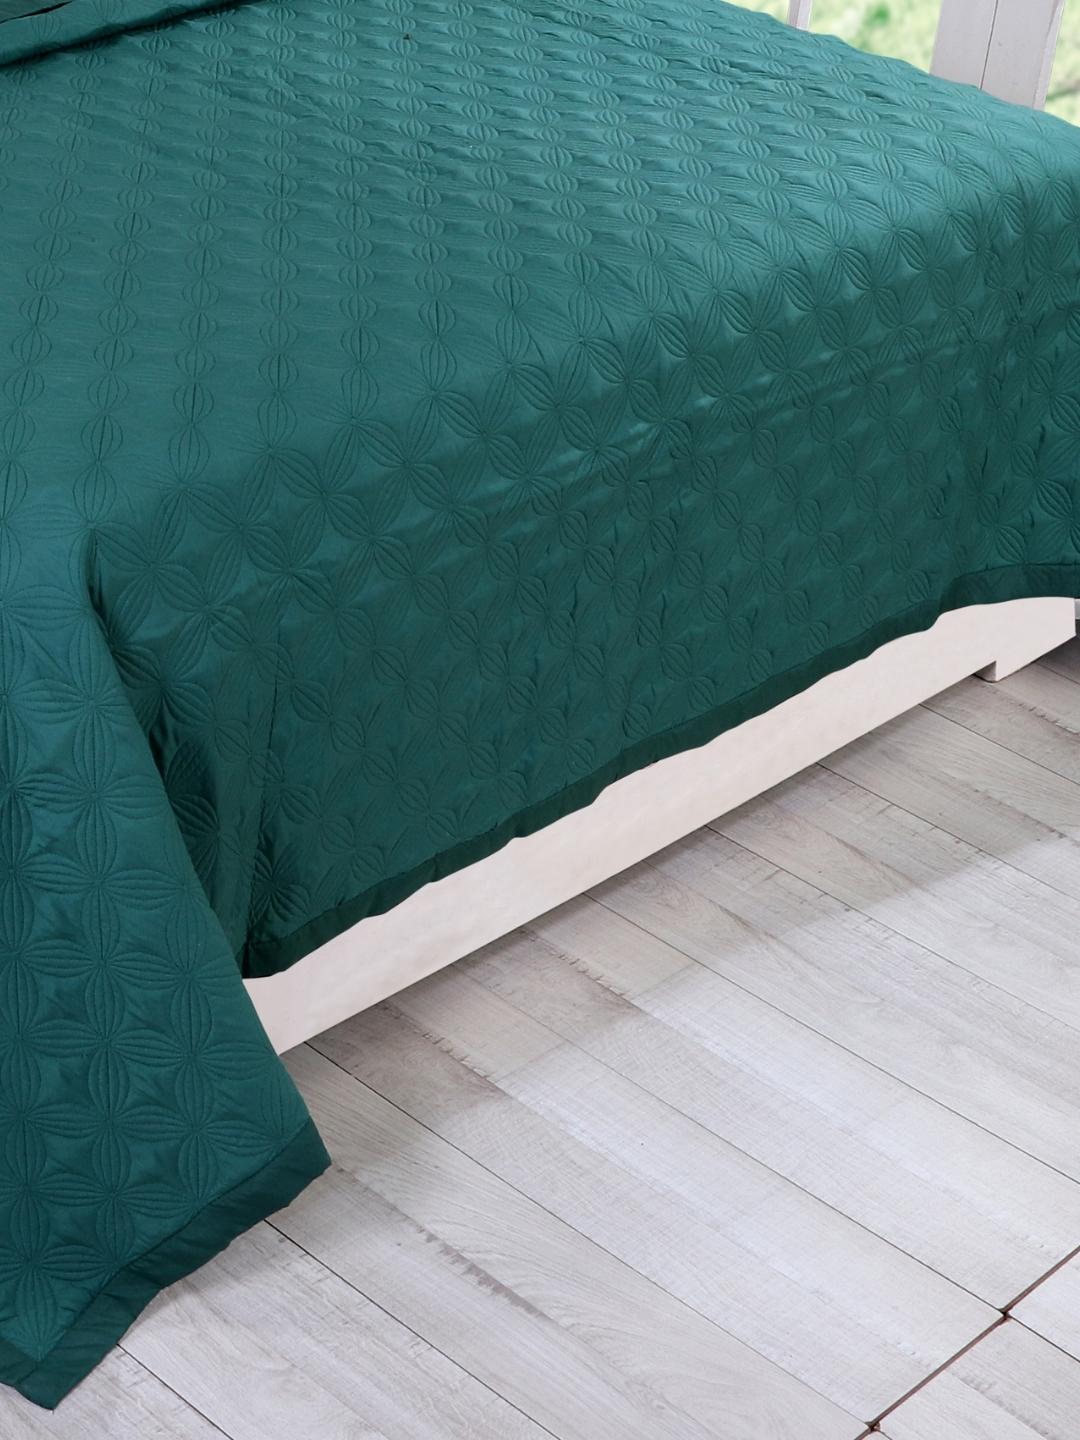 Double Bed Embroidered and Quilted Bedcover Set-Royal Green